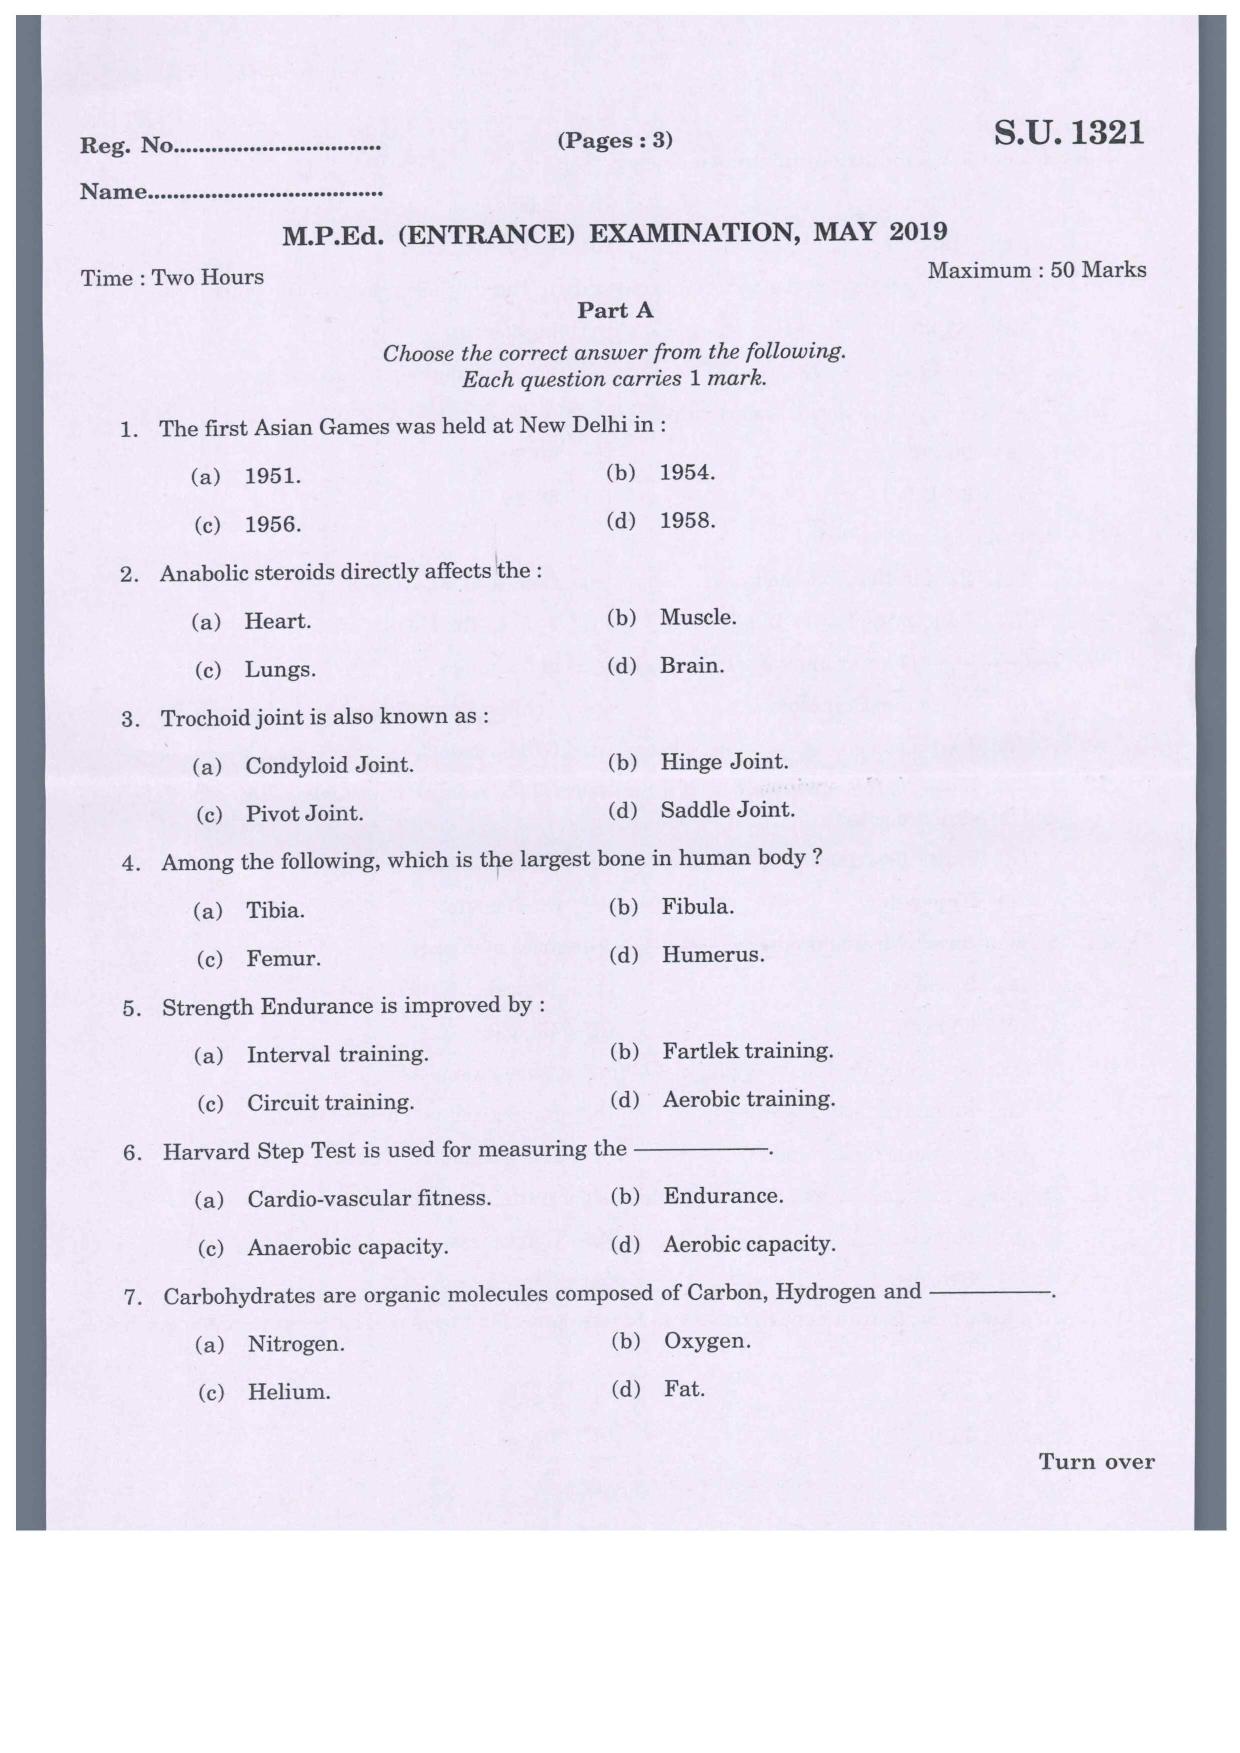 SSUS Entrance Exam MPED 2019 Question Paper - Page 1